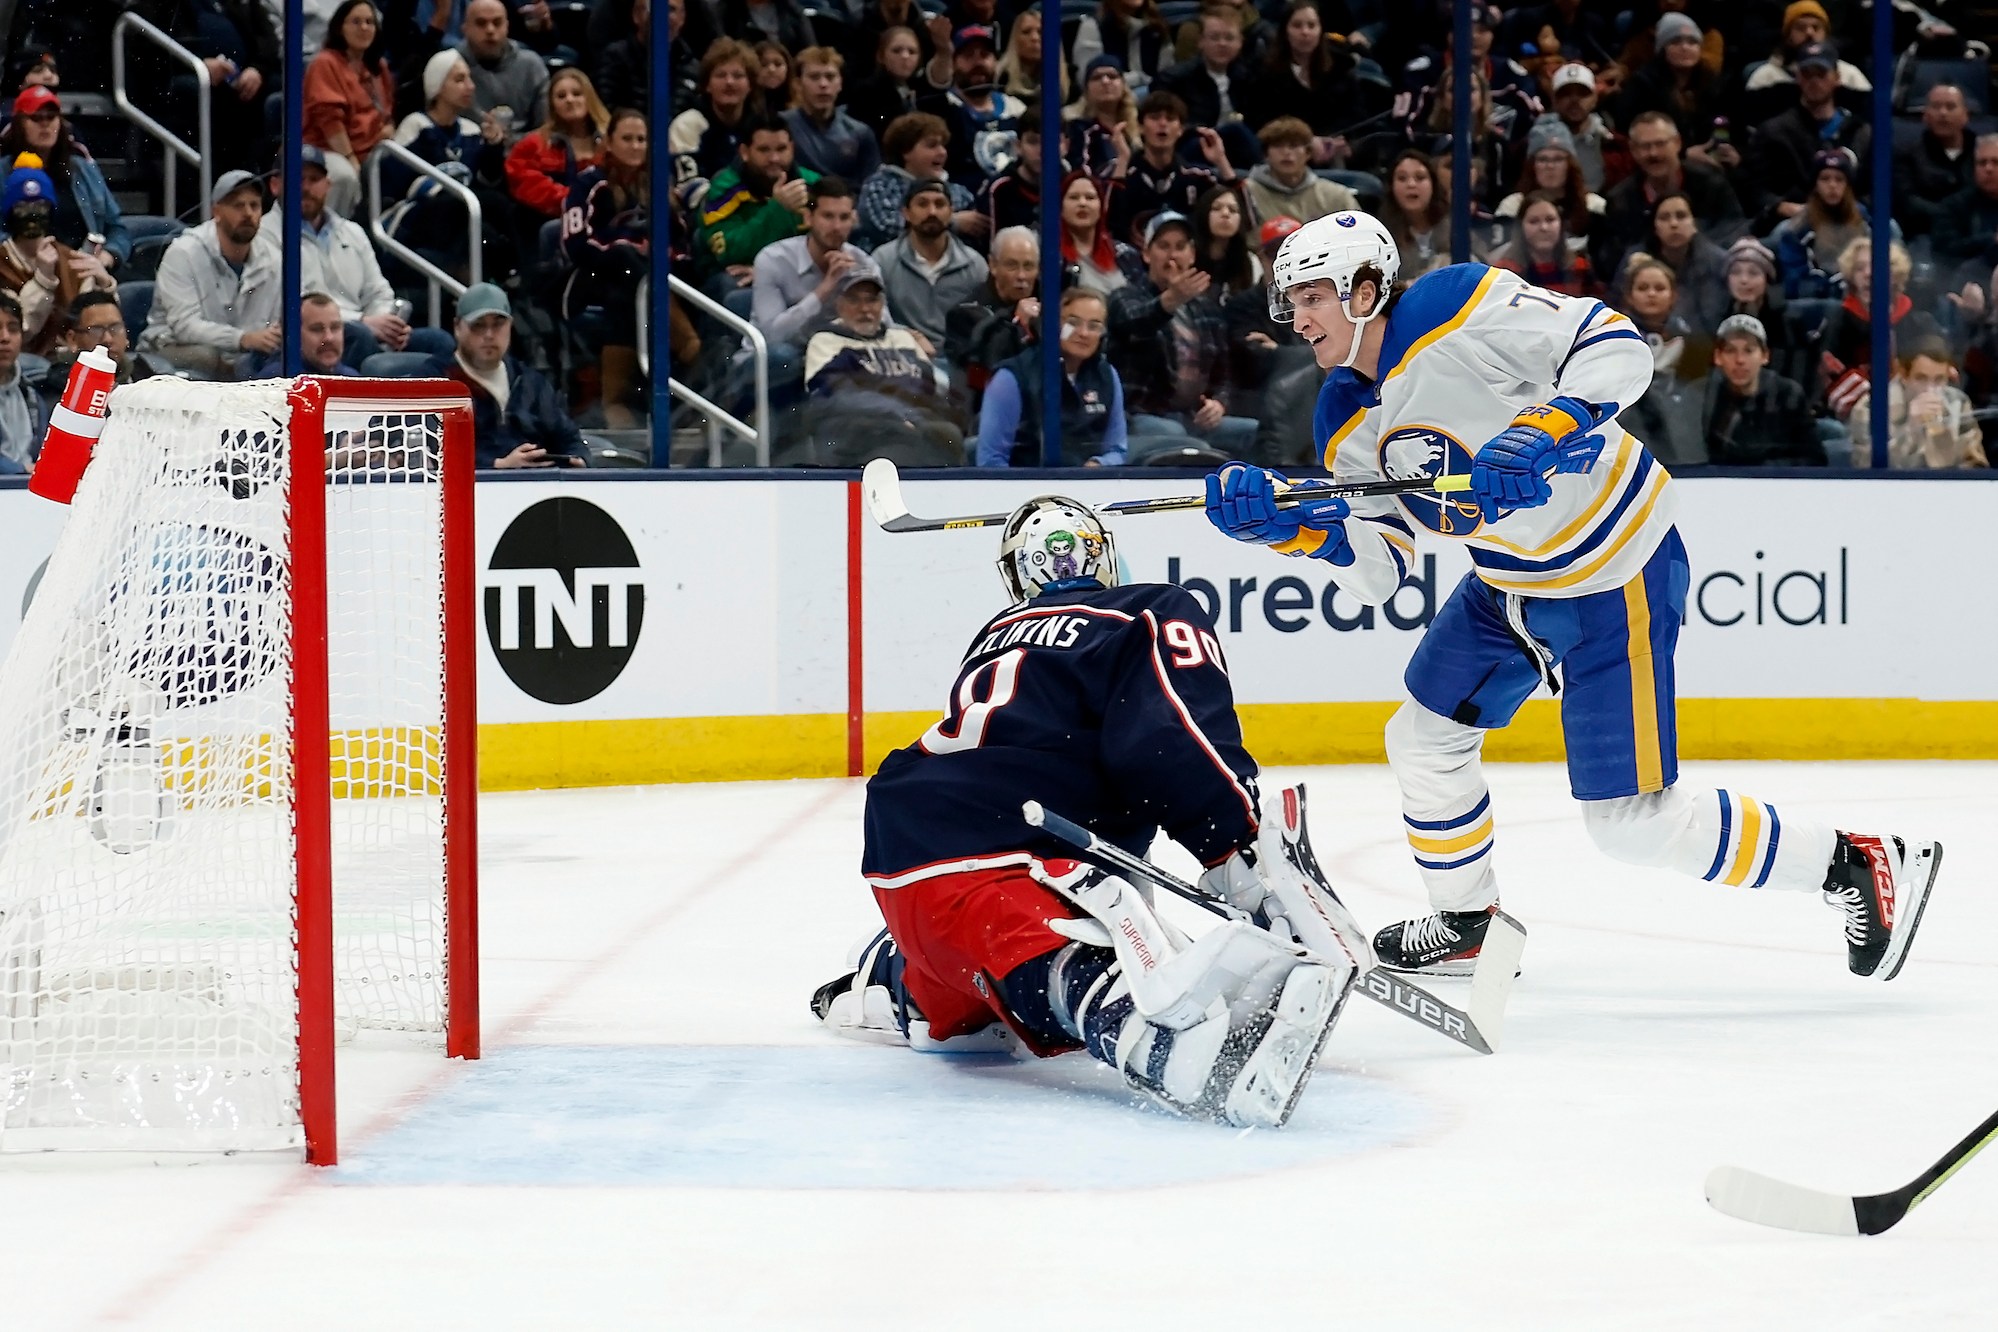 COLUMBUS, OH - DECEMBER 07: Tage Thompson #72 of the Buffalo Sabres beats Elvis Merzlikins #90 of the Columbus Blue Jackets for his first of four goals in the first period of the game at Nationwide Arena on December 7, 2022 in Columbus, Ohio. (Photo by Kirk Irwin/Getty Images)